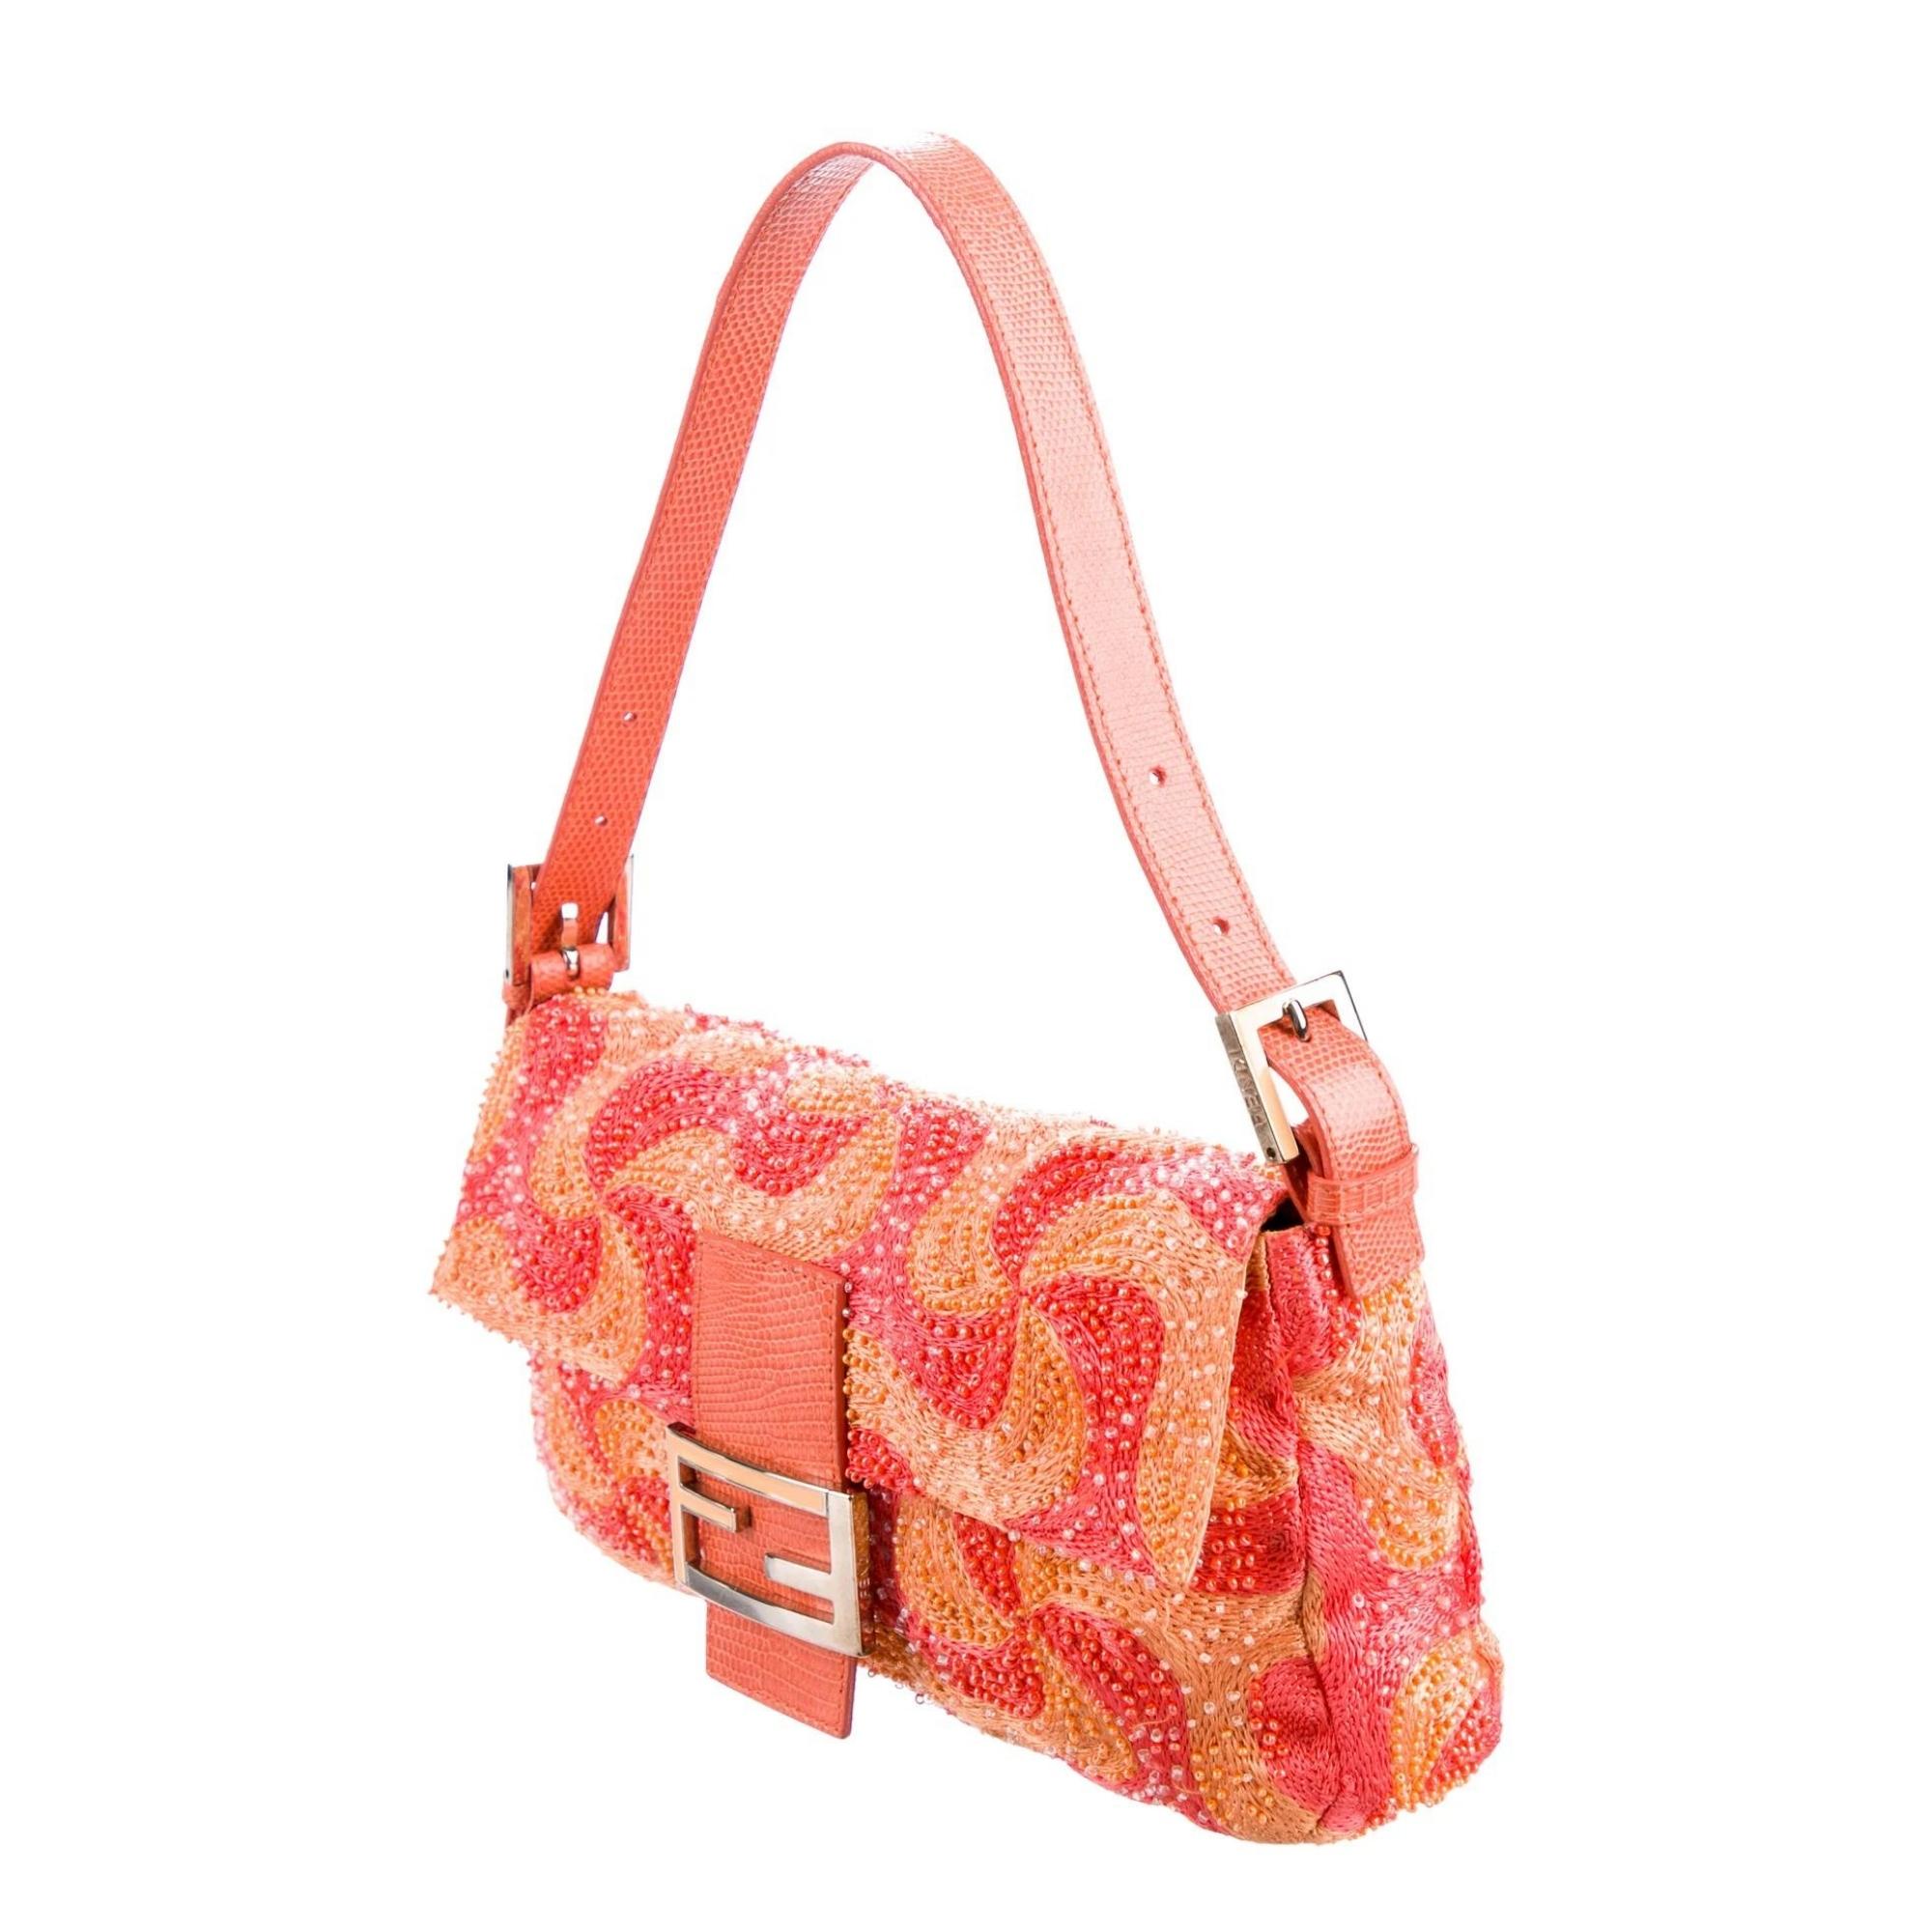 This bag features silver-tone tone hardware, single flat shoulder strap, orange lizard trim, marigold and multicolor embroidered exterior with beads, lime satin lining, single interior zip pocket and magnetic snap closure at front flap featuring FF